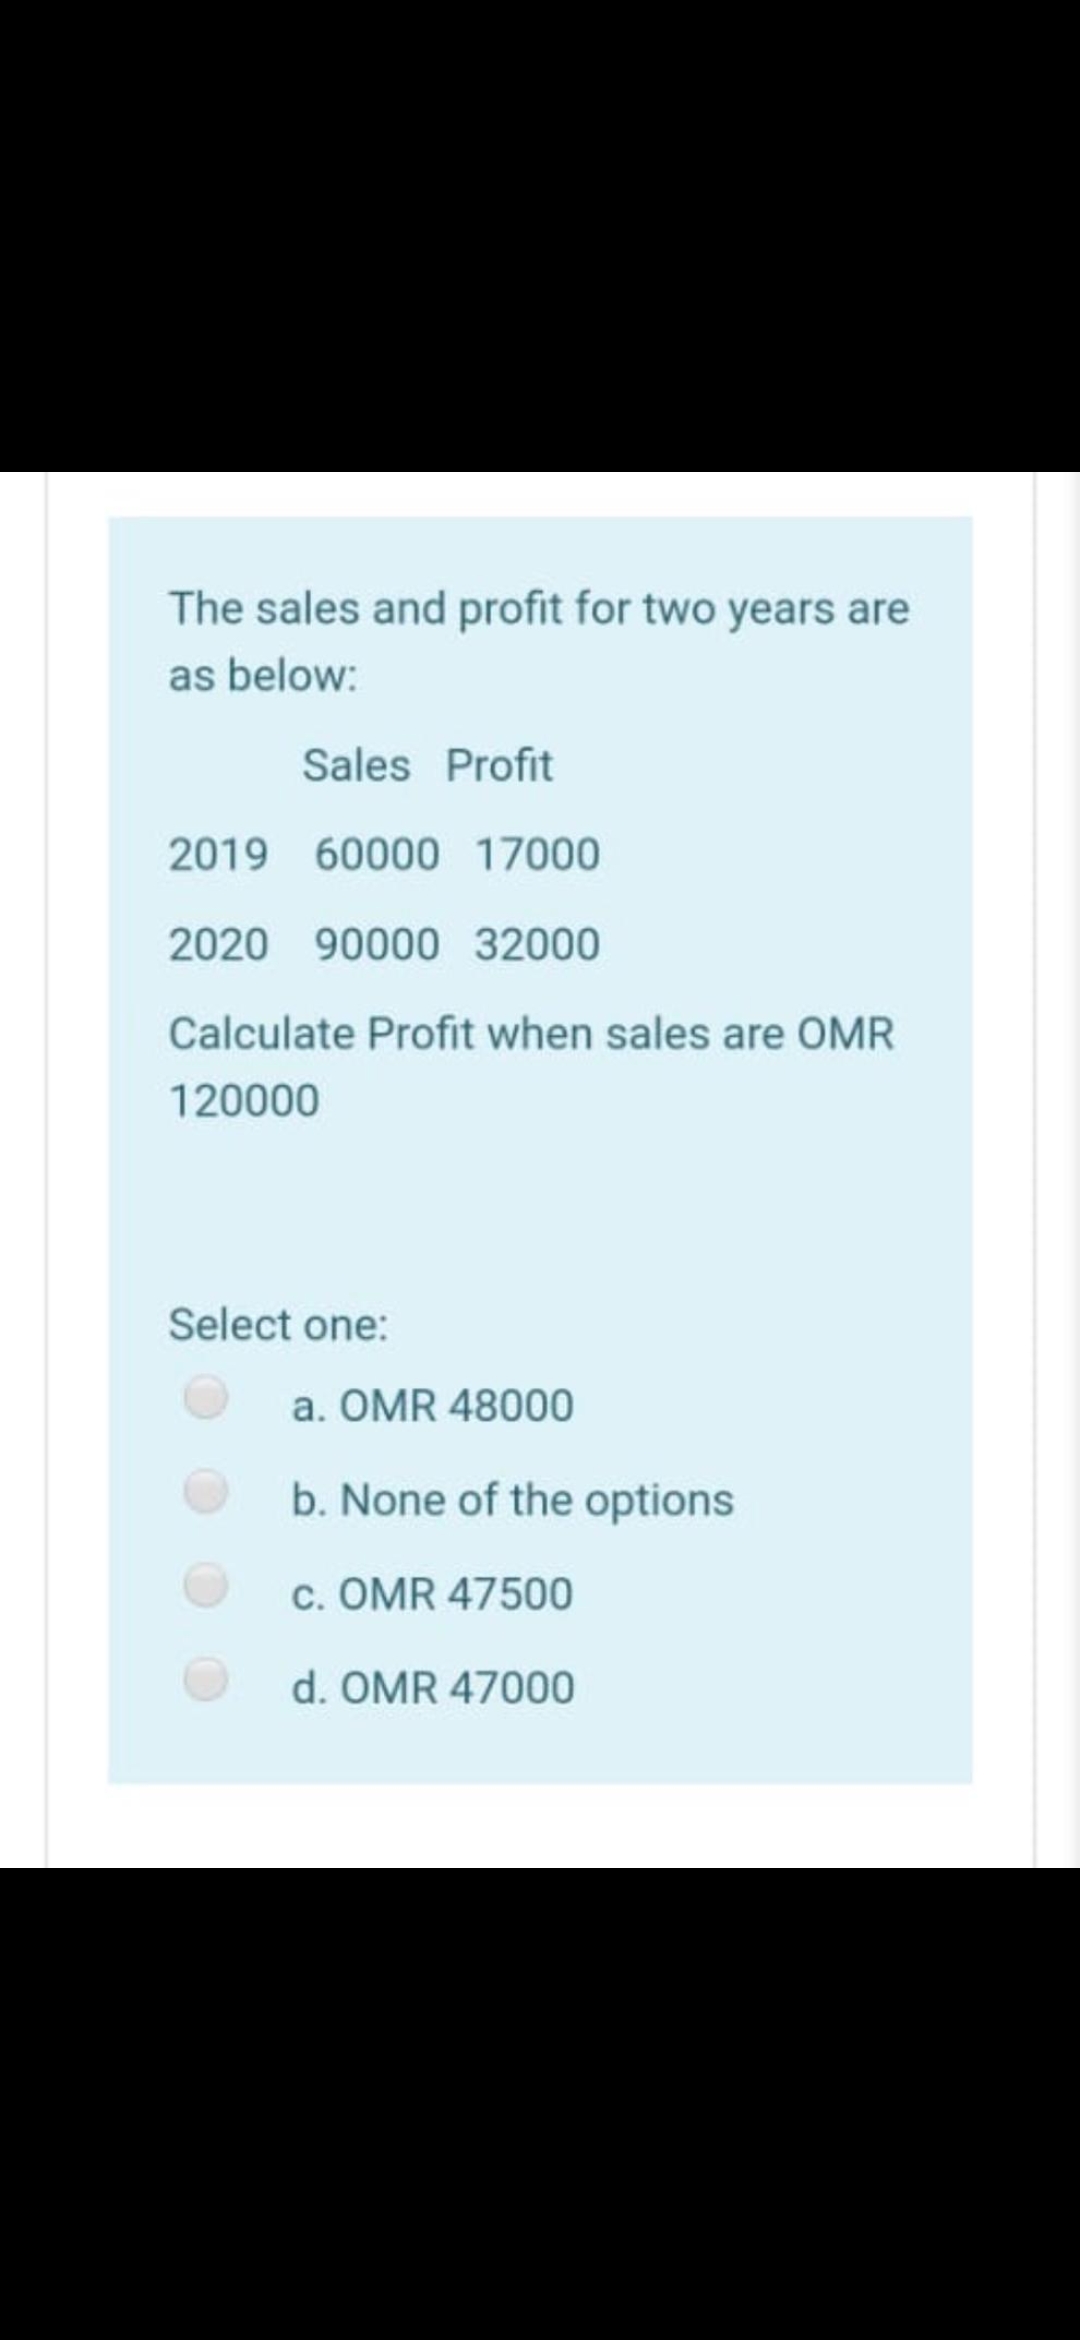 The sales and profit for two years are
as below:
Sales Profit
2019 60000 17000
2020
90000 32000
Calculate Profit when sales are OMR
120000
Select one:
a. OMR 48000
b. None of the options
c. OMR 47500
d. OMR 47000
